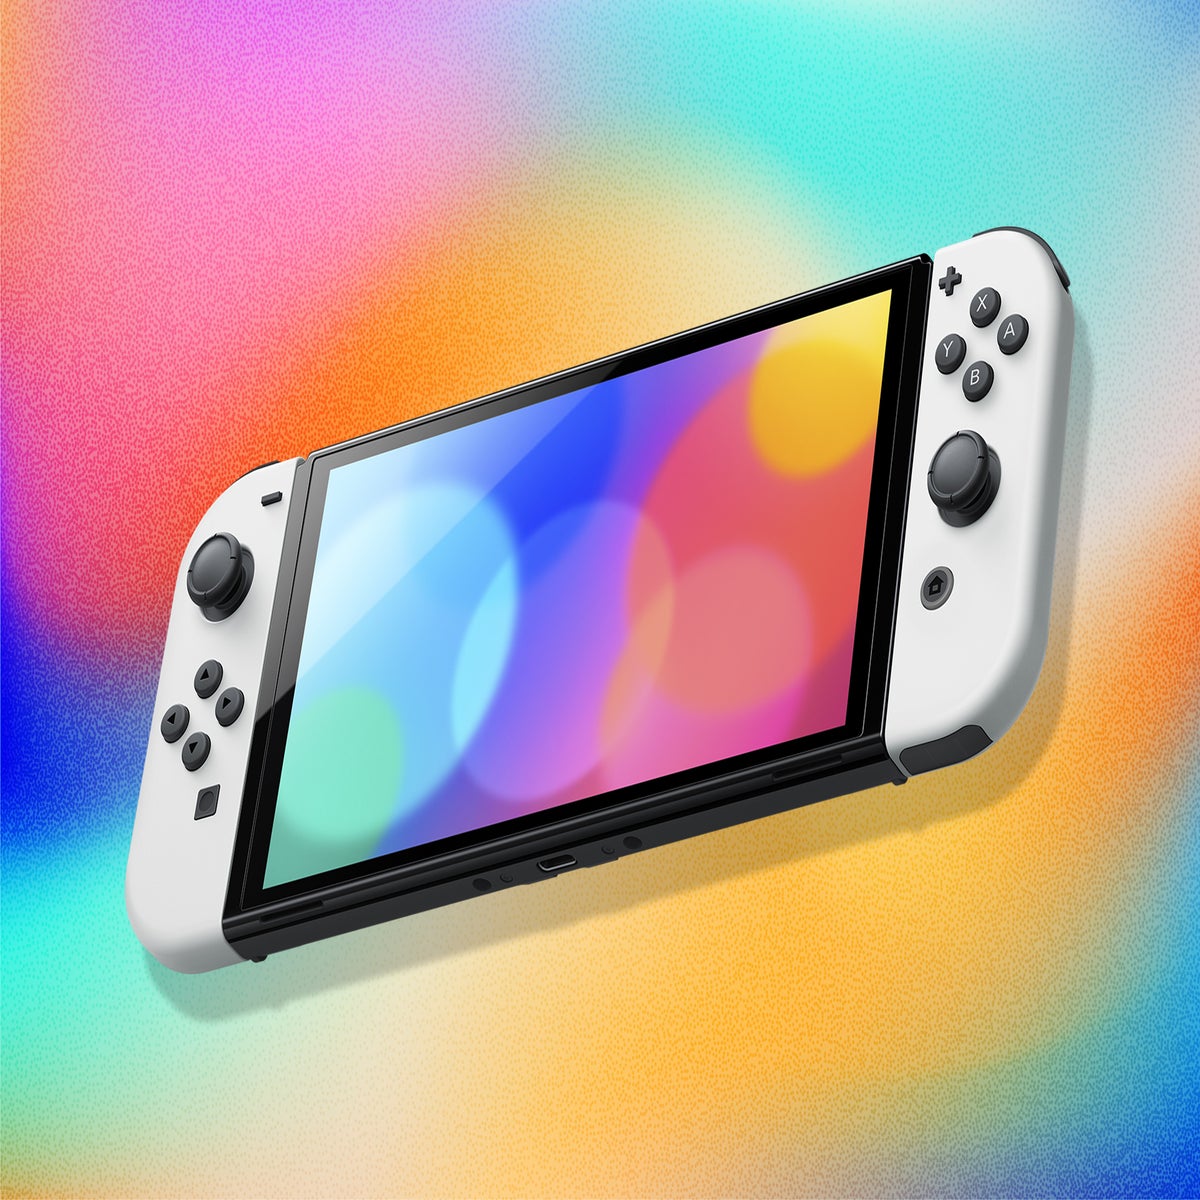 Nintendo Switch 2 rumors: Expected release date and what we want to see